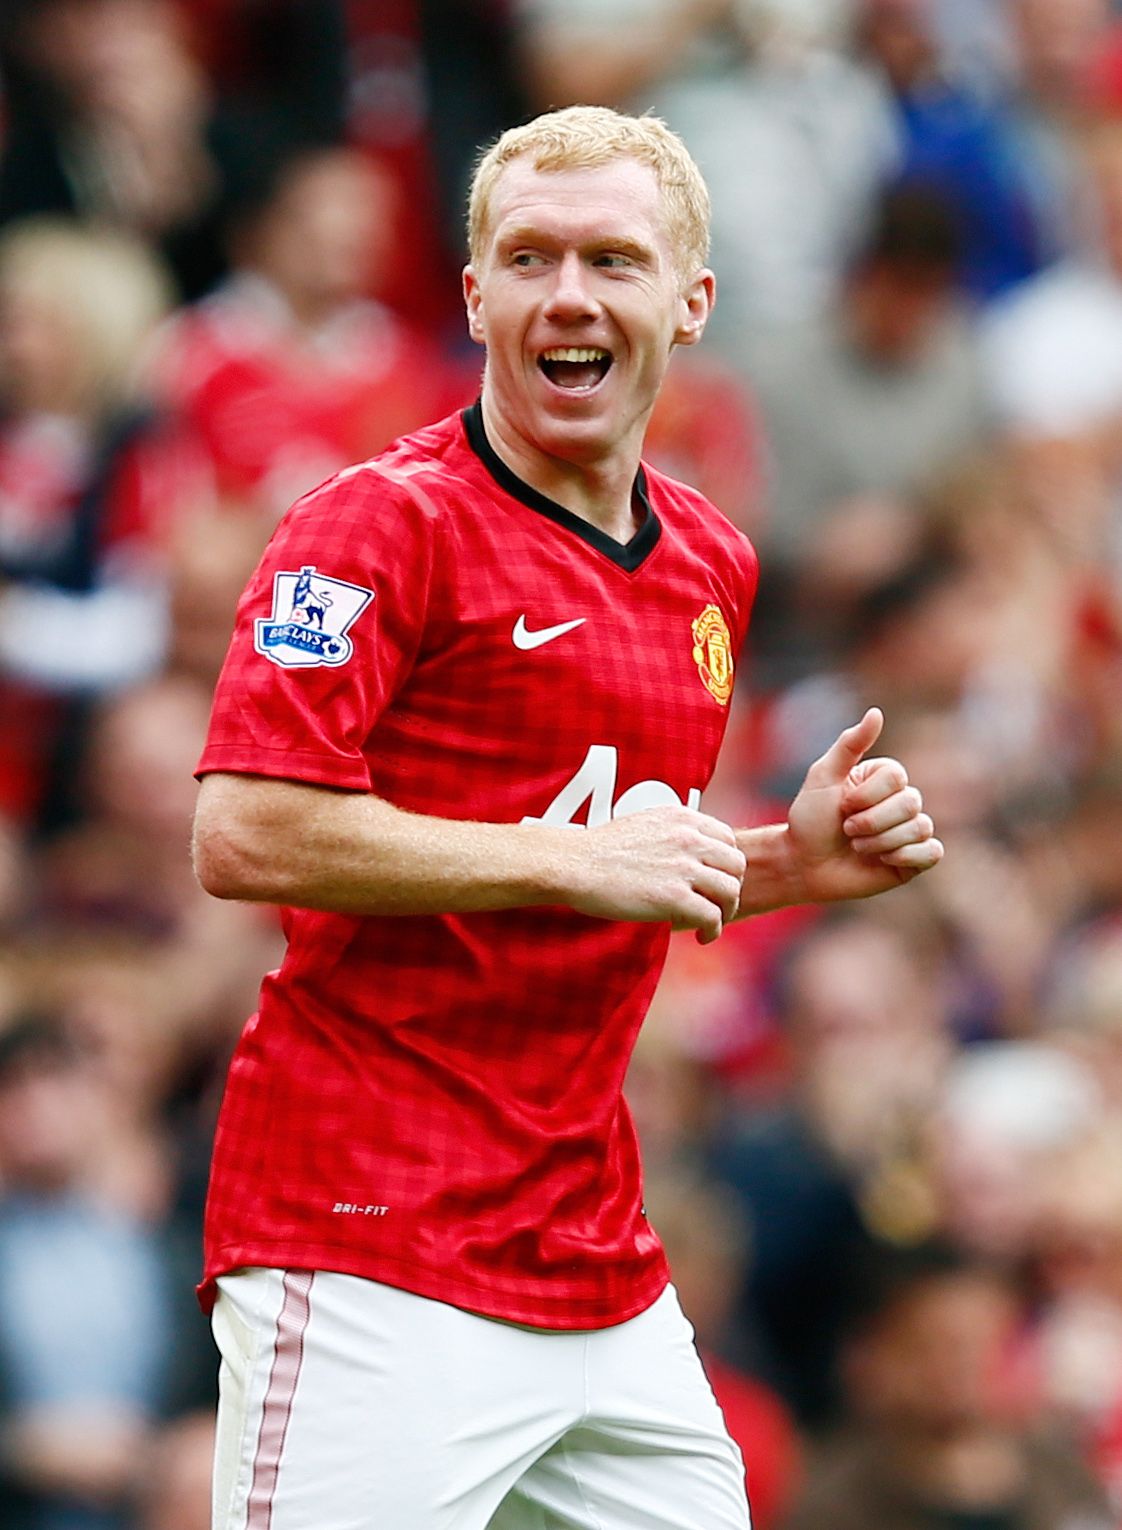 Scholes celebrates at Old Trafford.